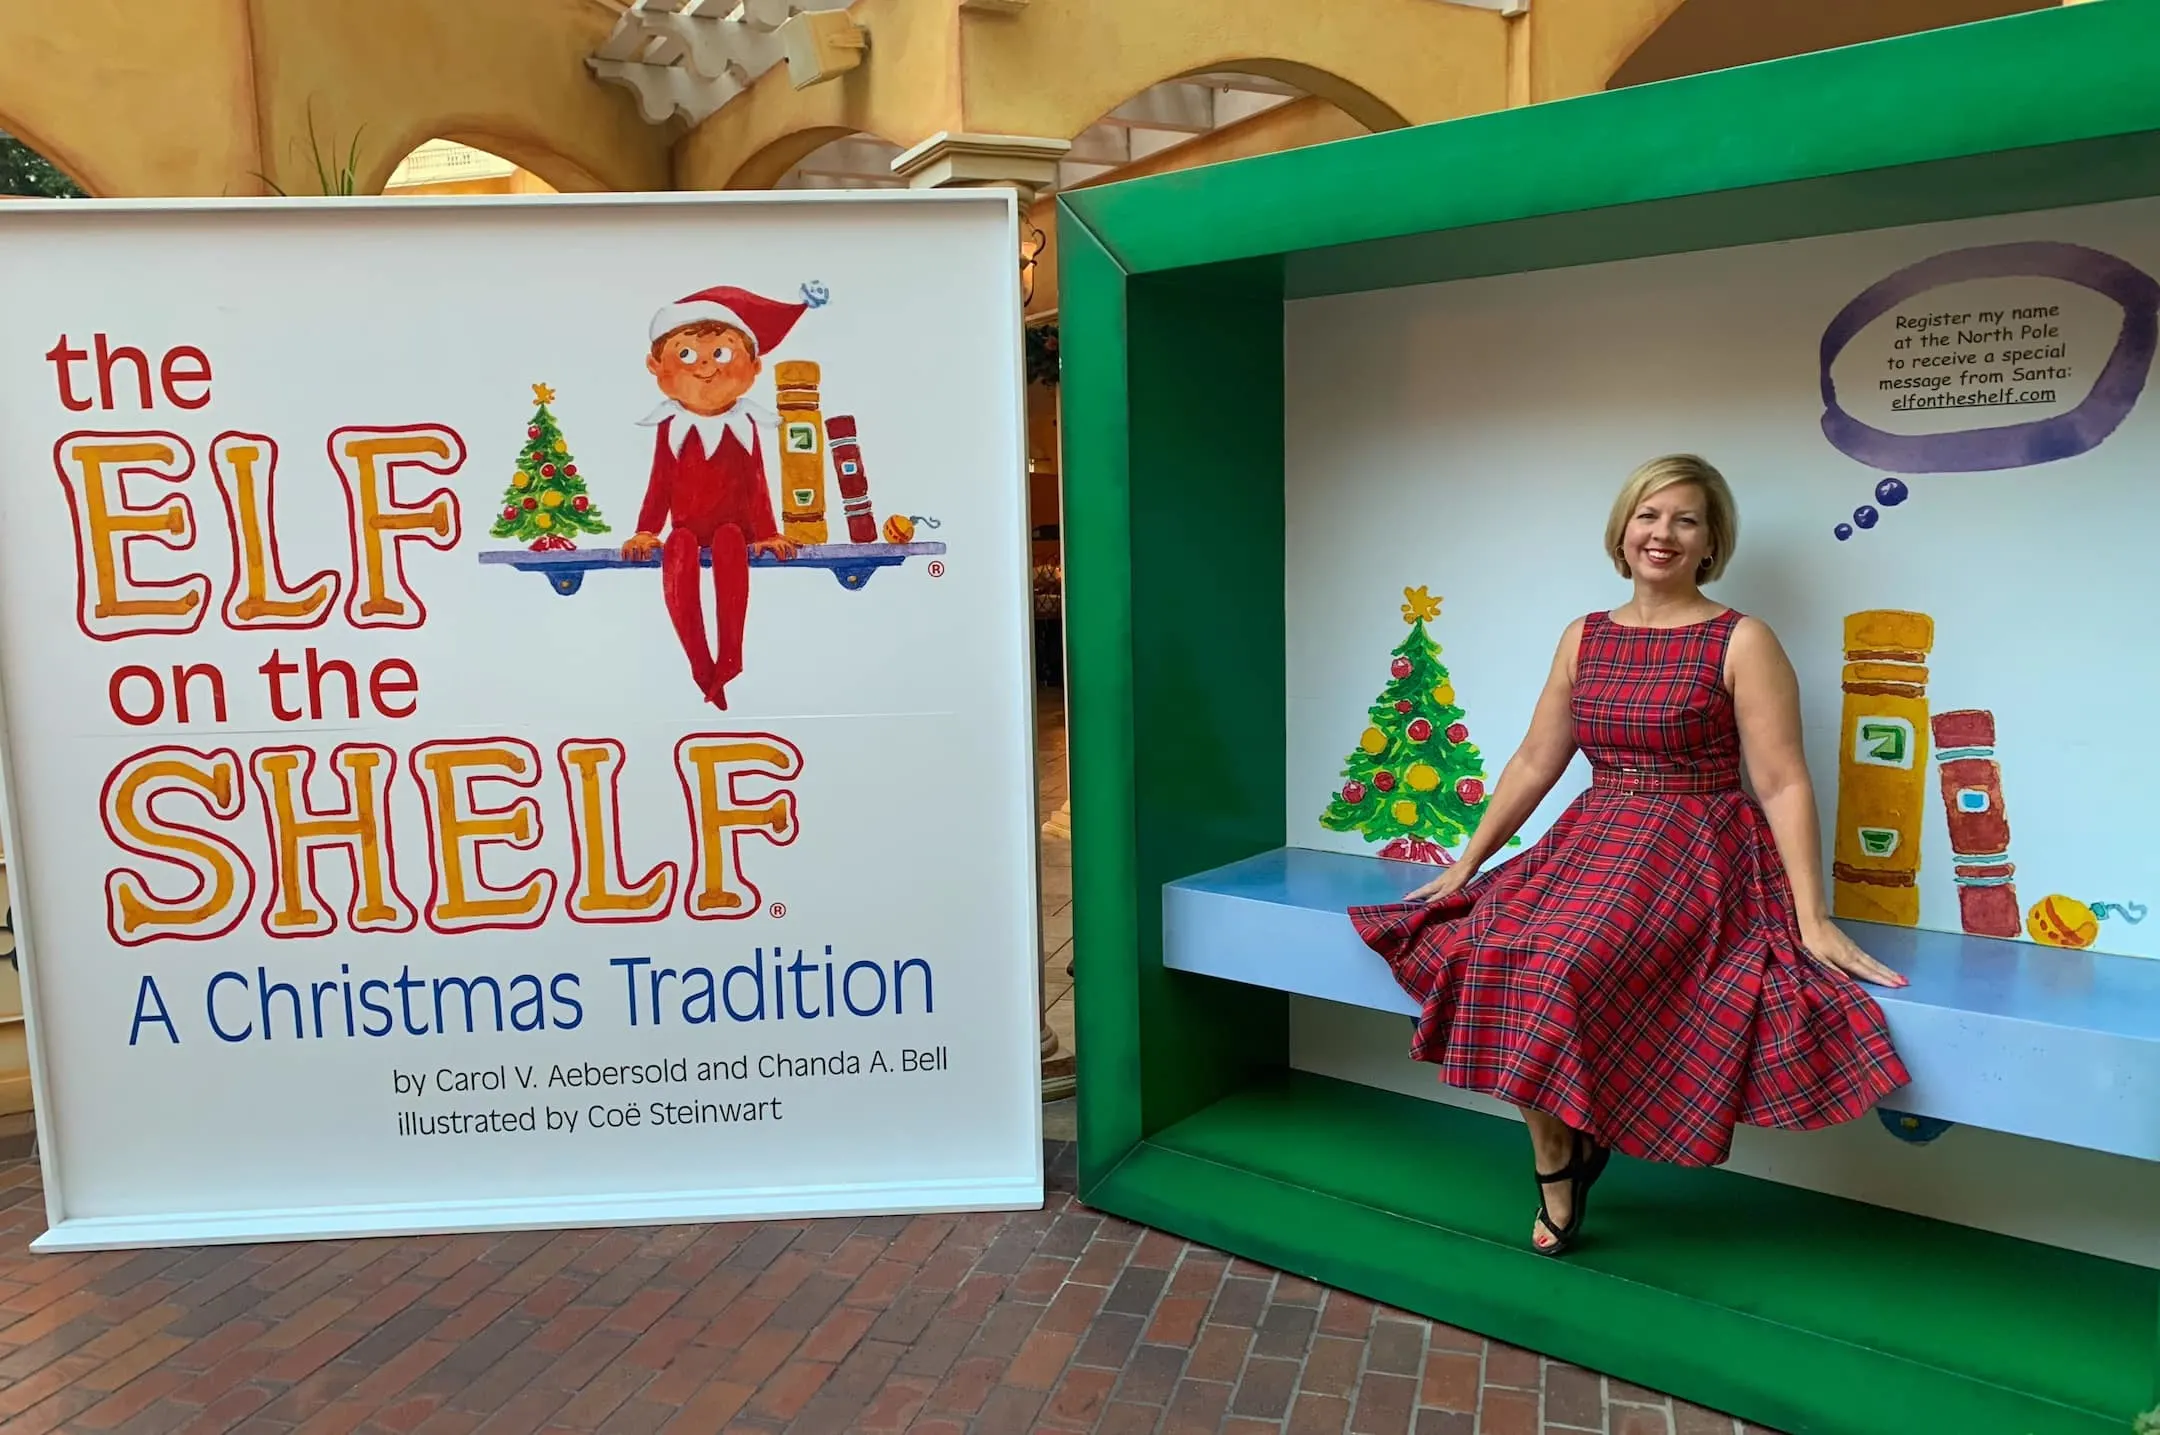 Gaylord Palms ICE 2018 A Christmas Story Orlando elf on the shelf character at breakfast